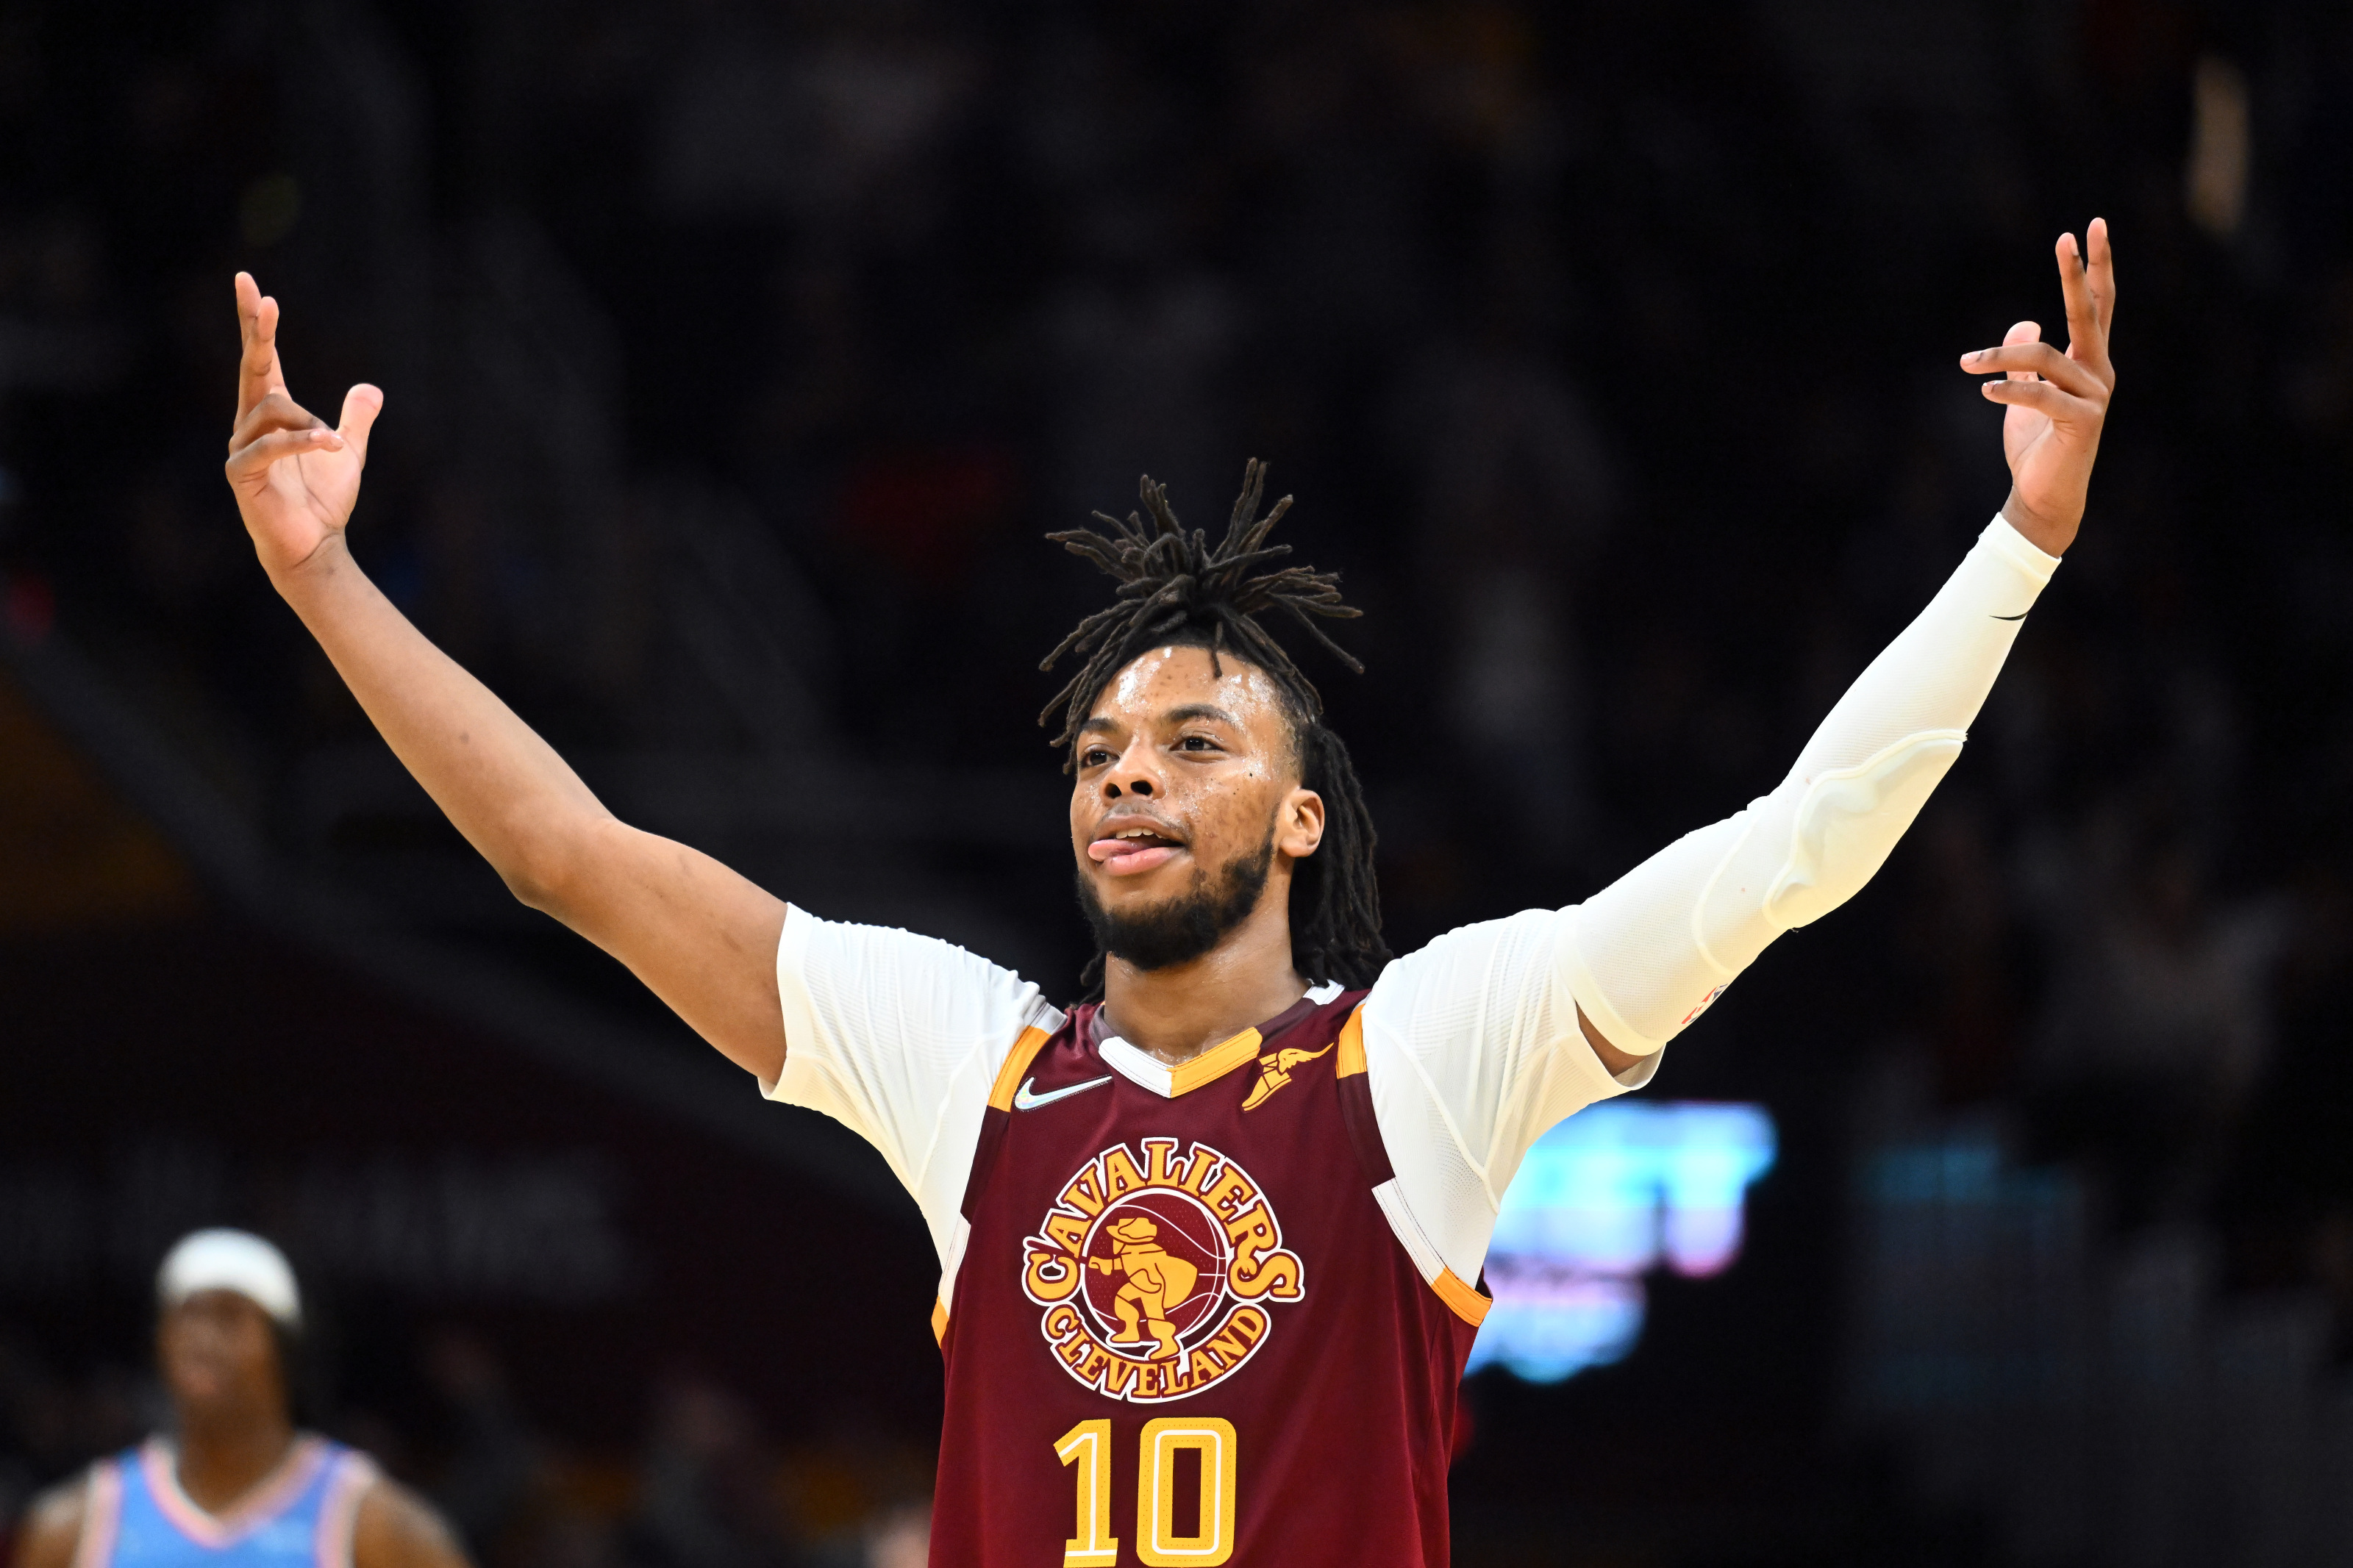 Darius Garland's Elite Play Has the Cavs Ready to Disrupt the NBA